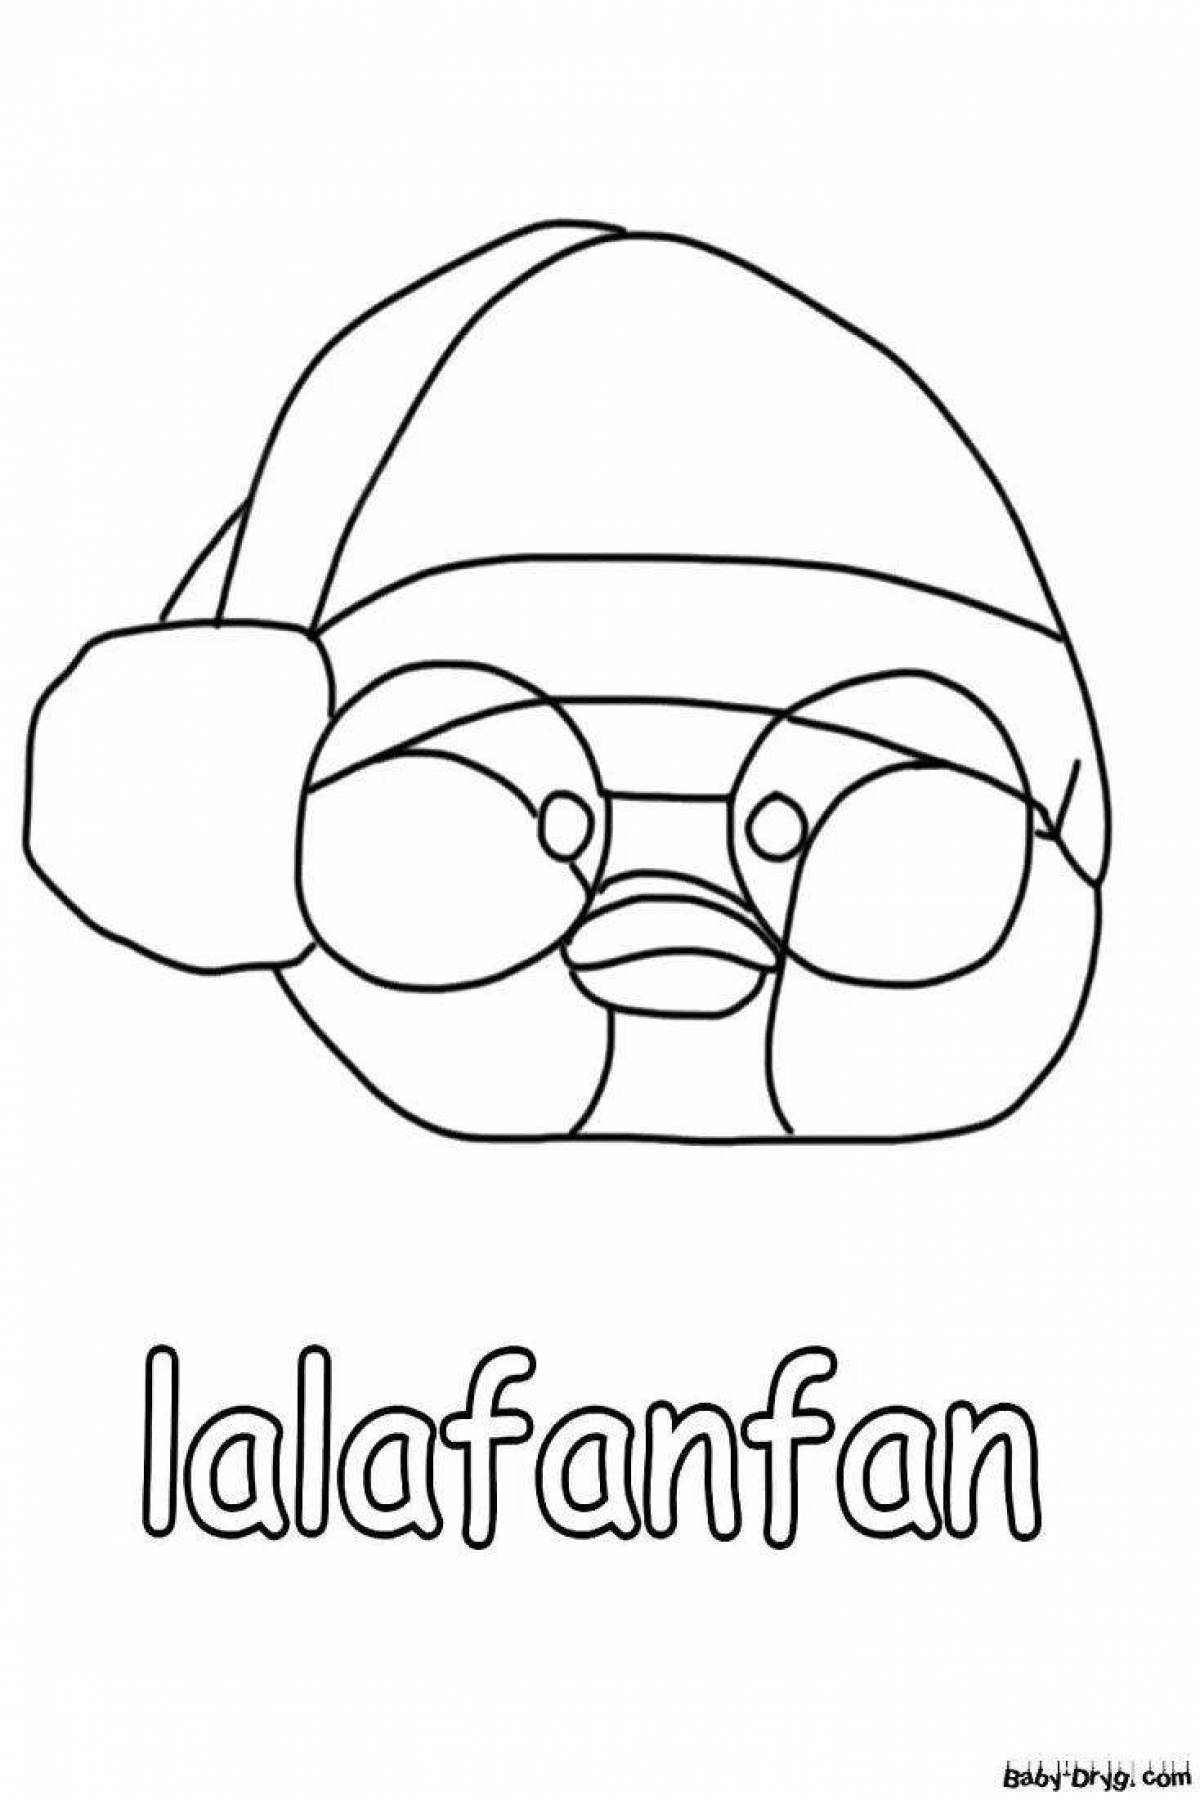 Lalalafanfan shiny duck coloring page